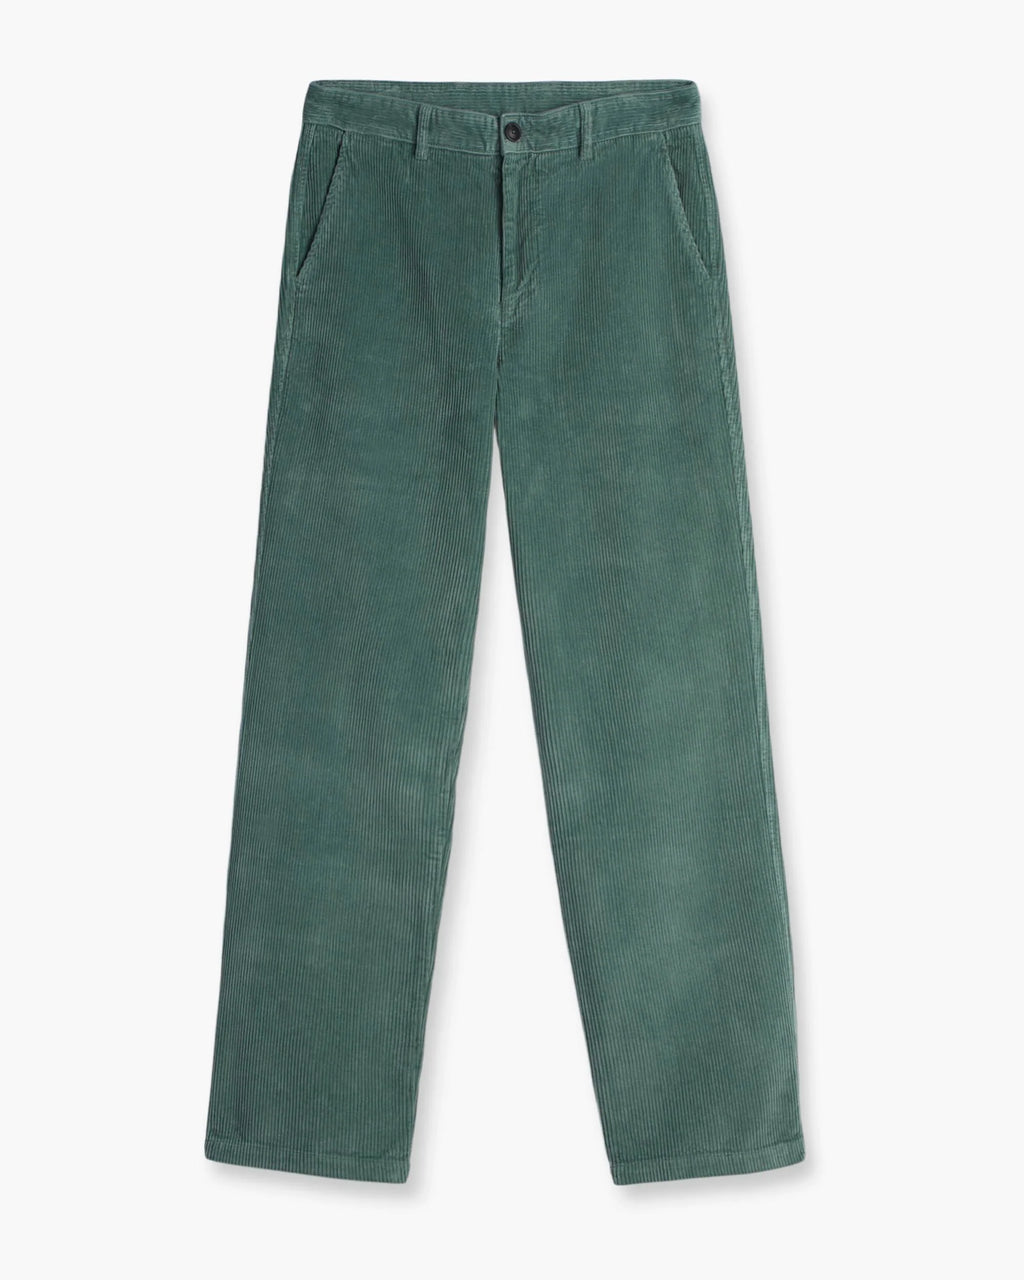 HOMECORE Lynch Cord Pant - MINERAL GREEN